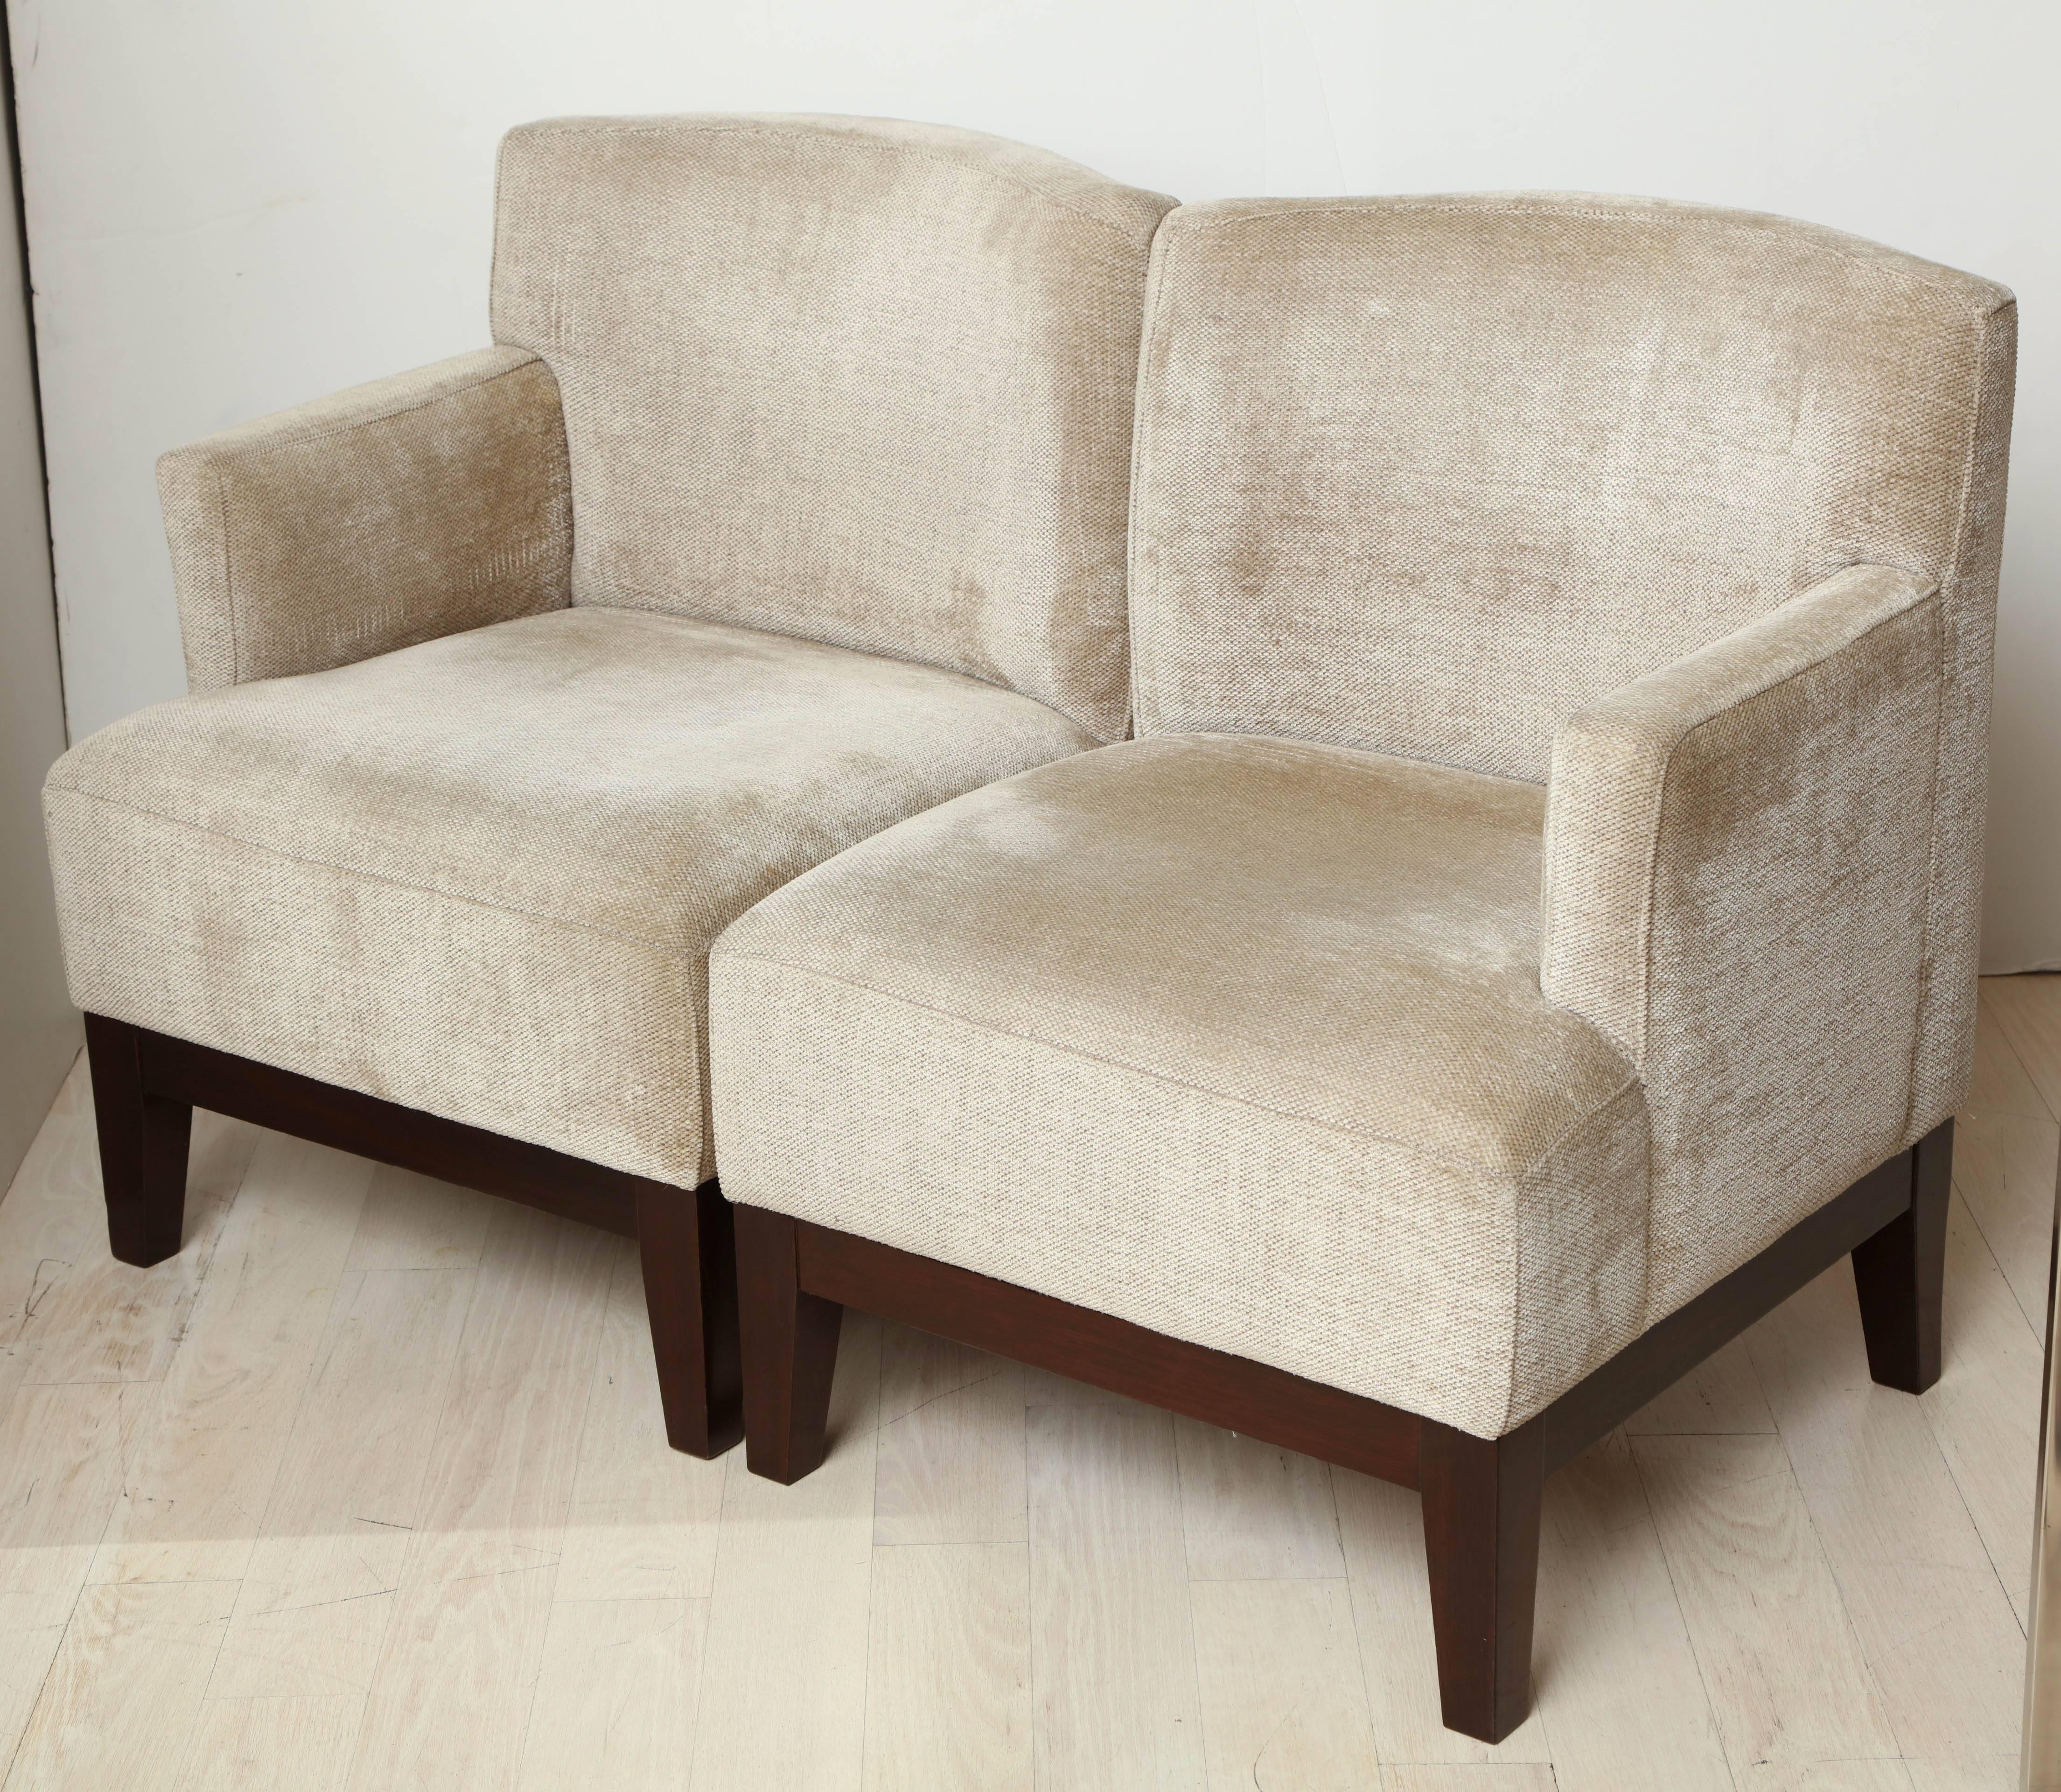 Late 20th Century Pair of Modern Single Arm Wood and Upholstered Beige Chenille Chairs, Belgium For Sale